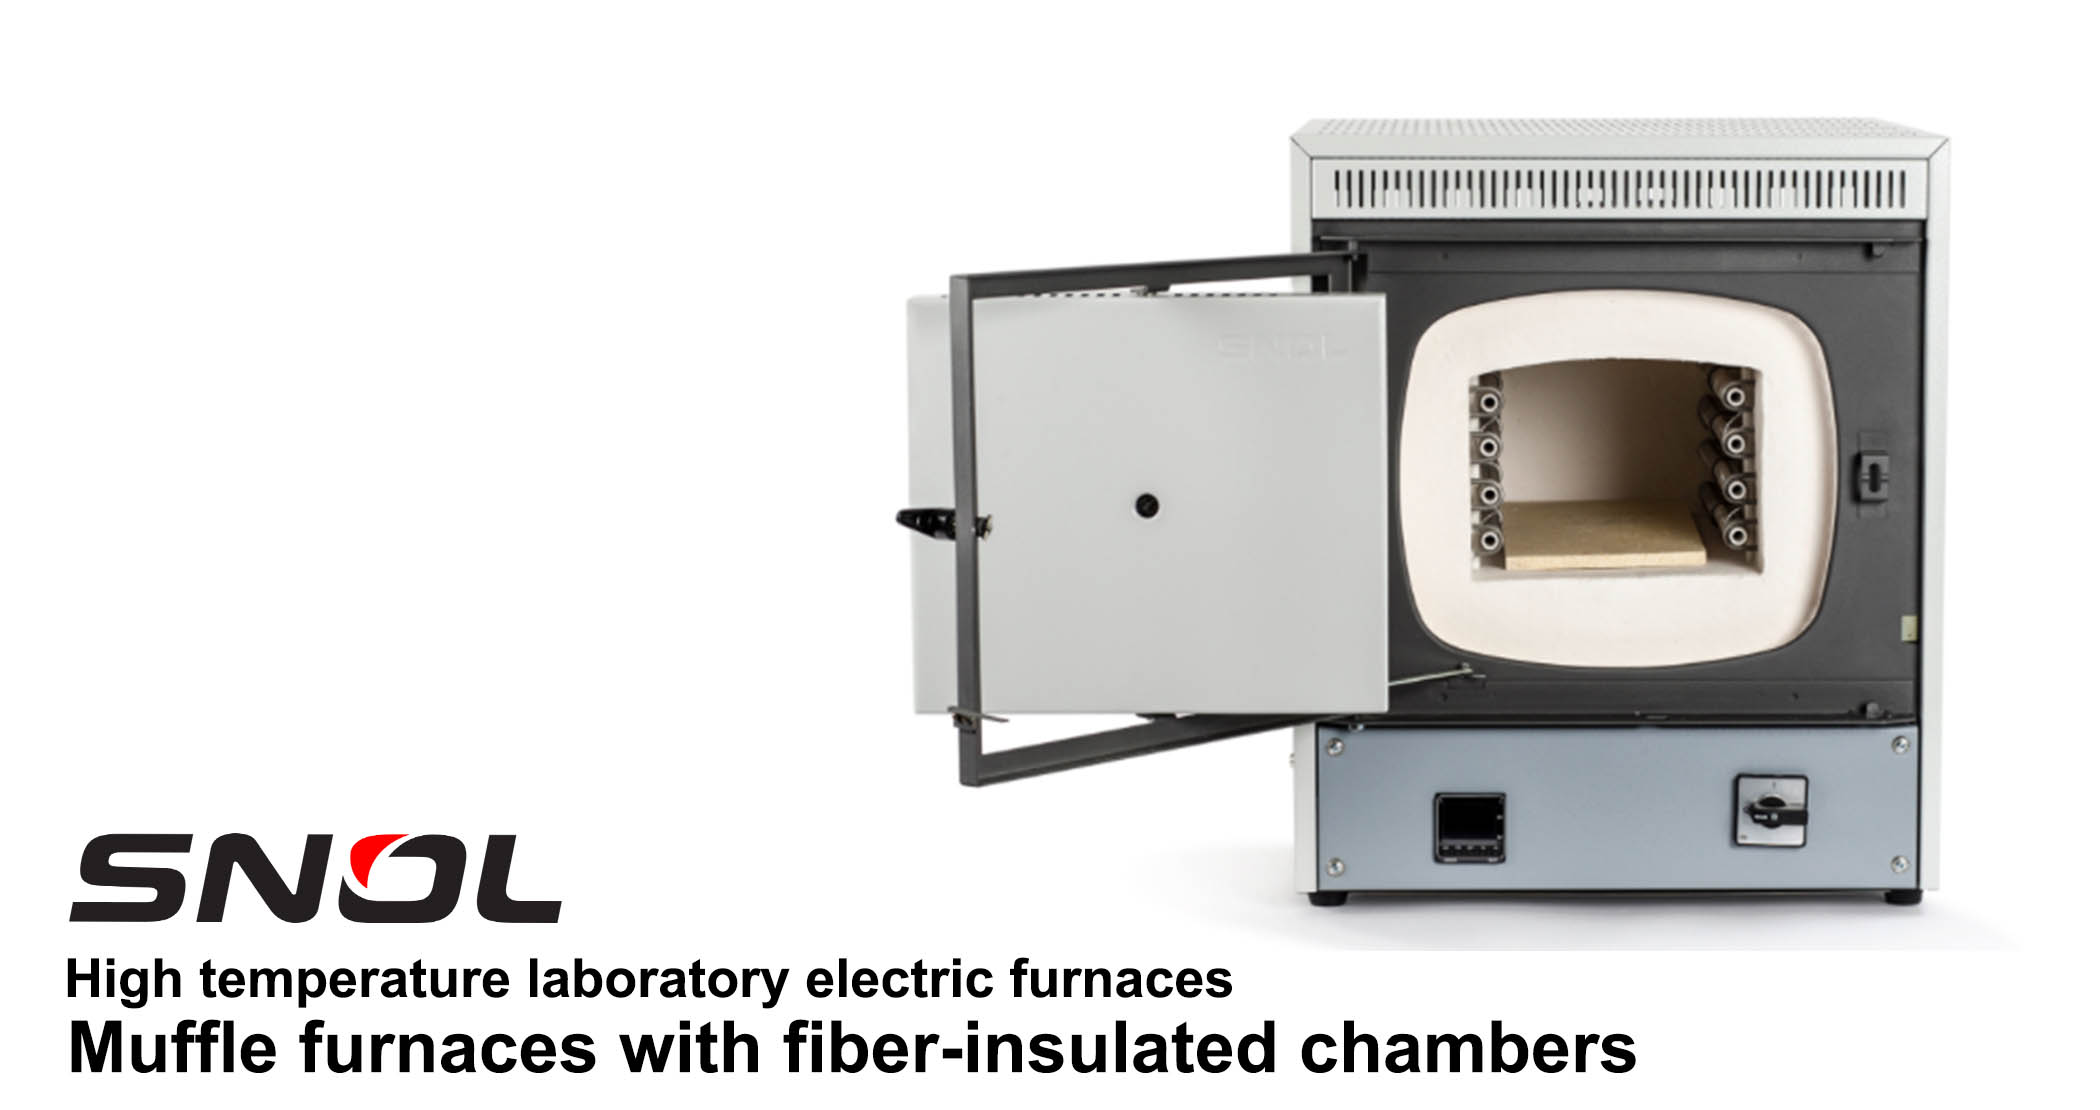 High temperature laboratory muffle furnaces with fiber-insulated chambers